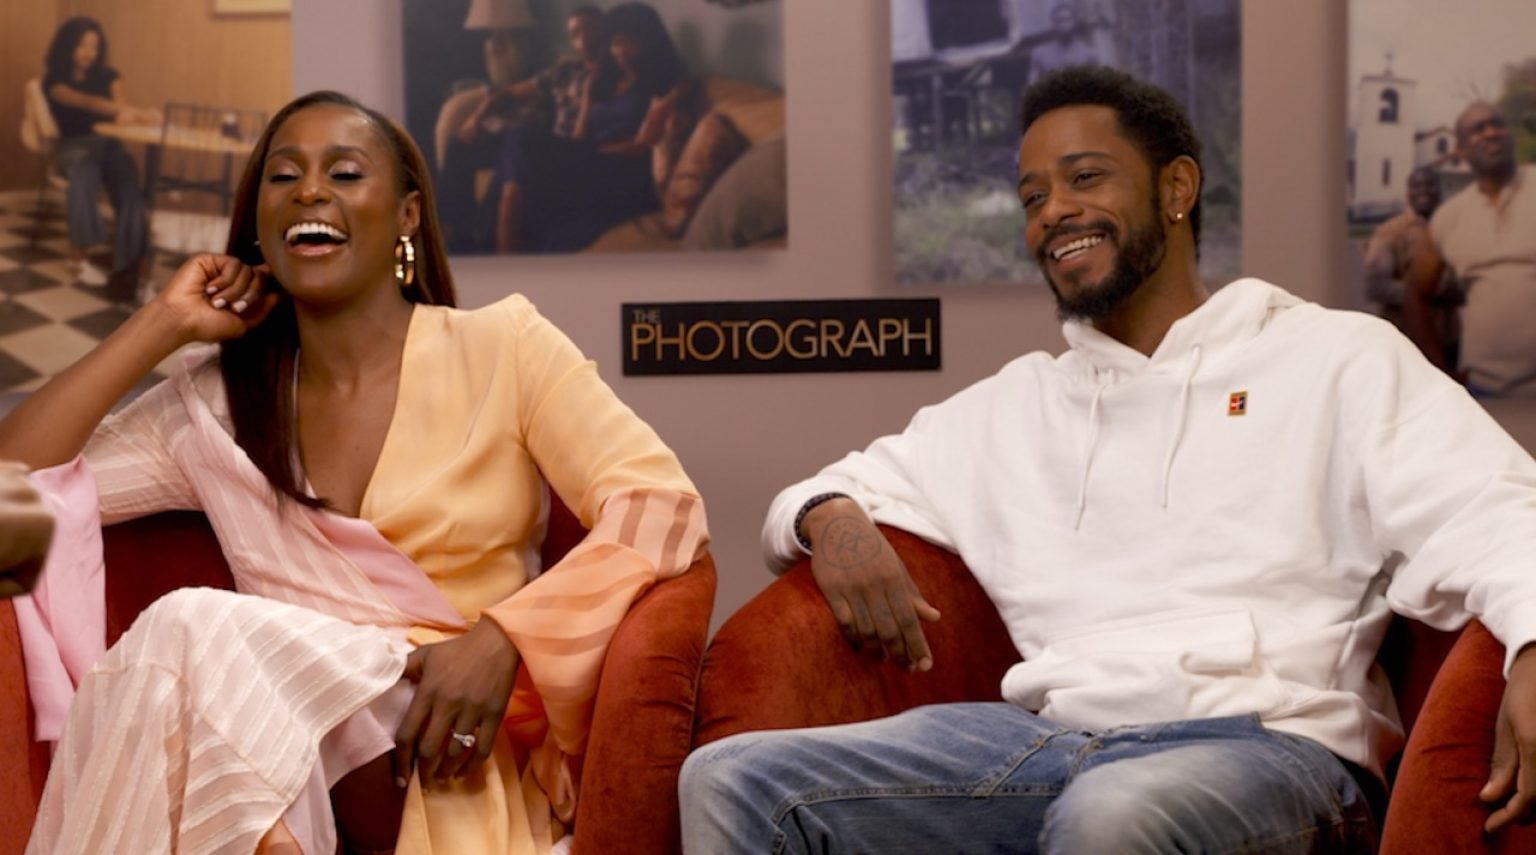 'Photograph' Star Lakeith Stanfield Sounds Off On Repairing Relationship With Journalists